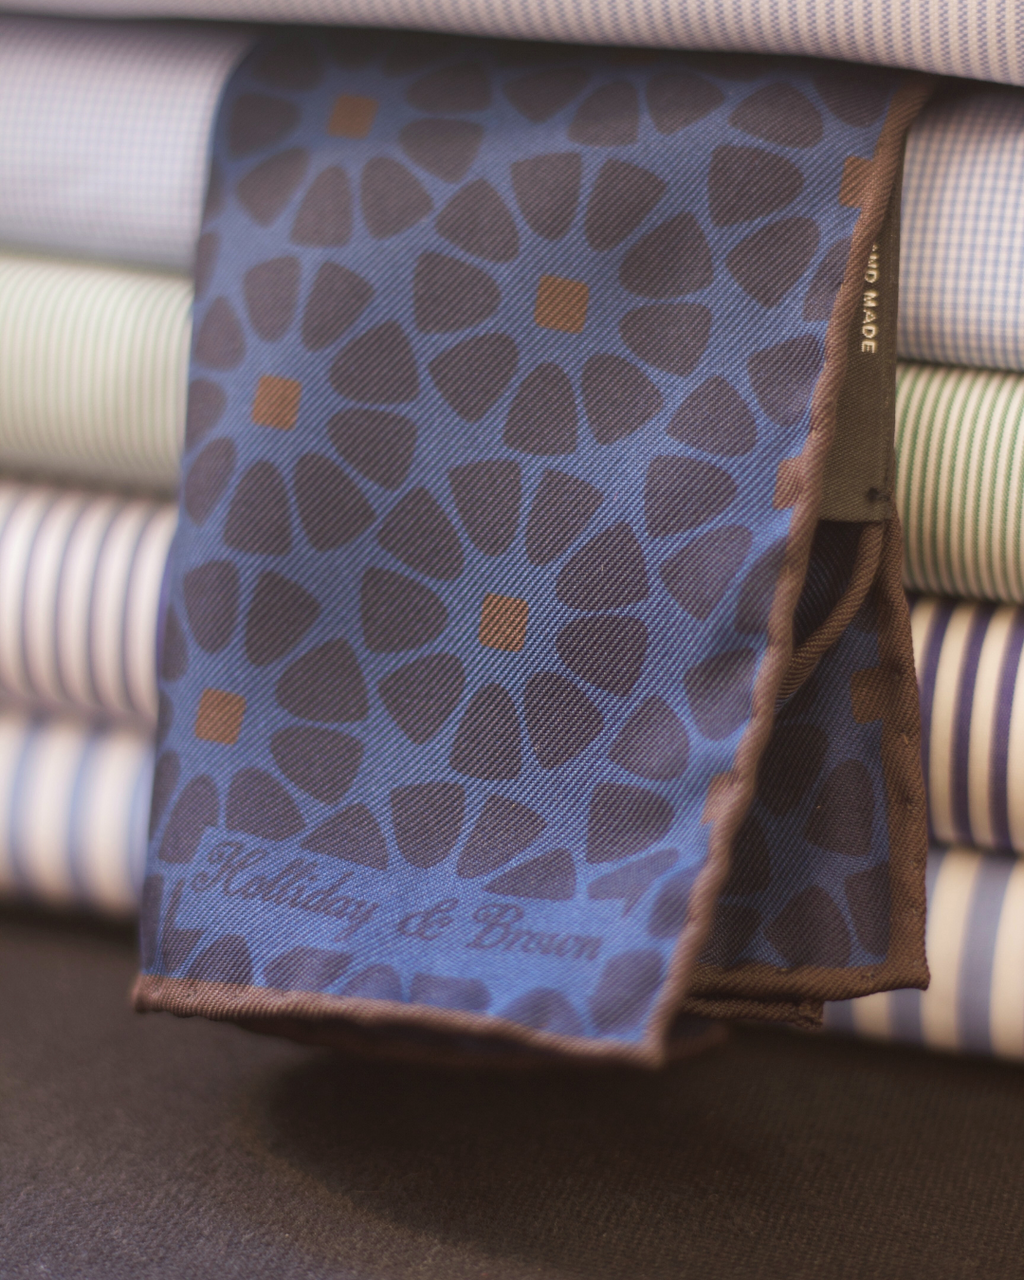 Holliday & Brown Hand-rolled   Holliday & Brown for Cruciani & Bella 100% Silk Blue, Brown Double Faces Patterned  Motif  Pocket Square Handmade in Italy 32 cm X 32 cm